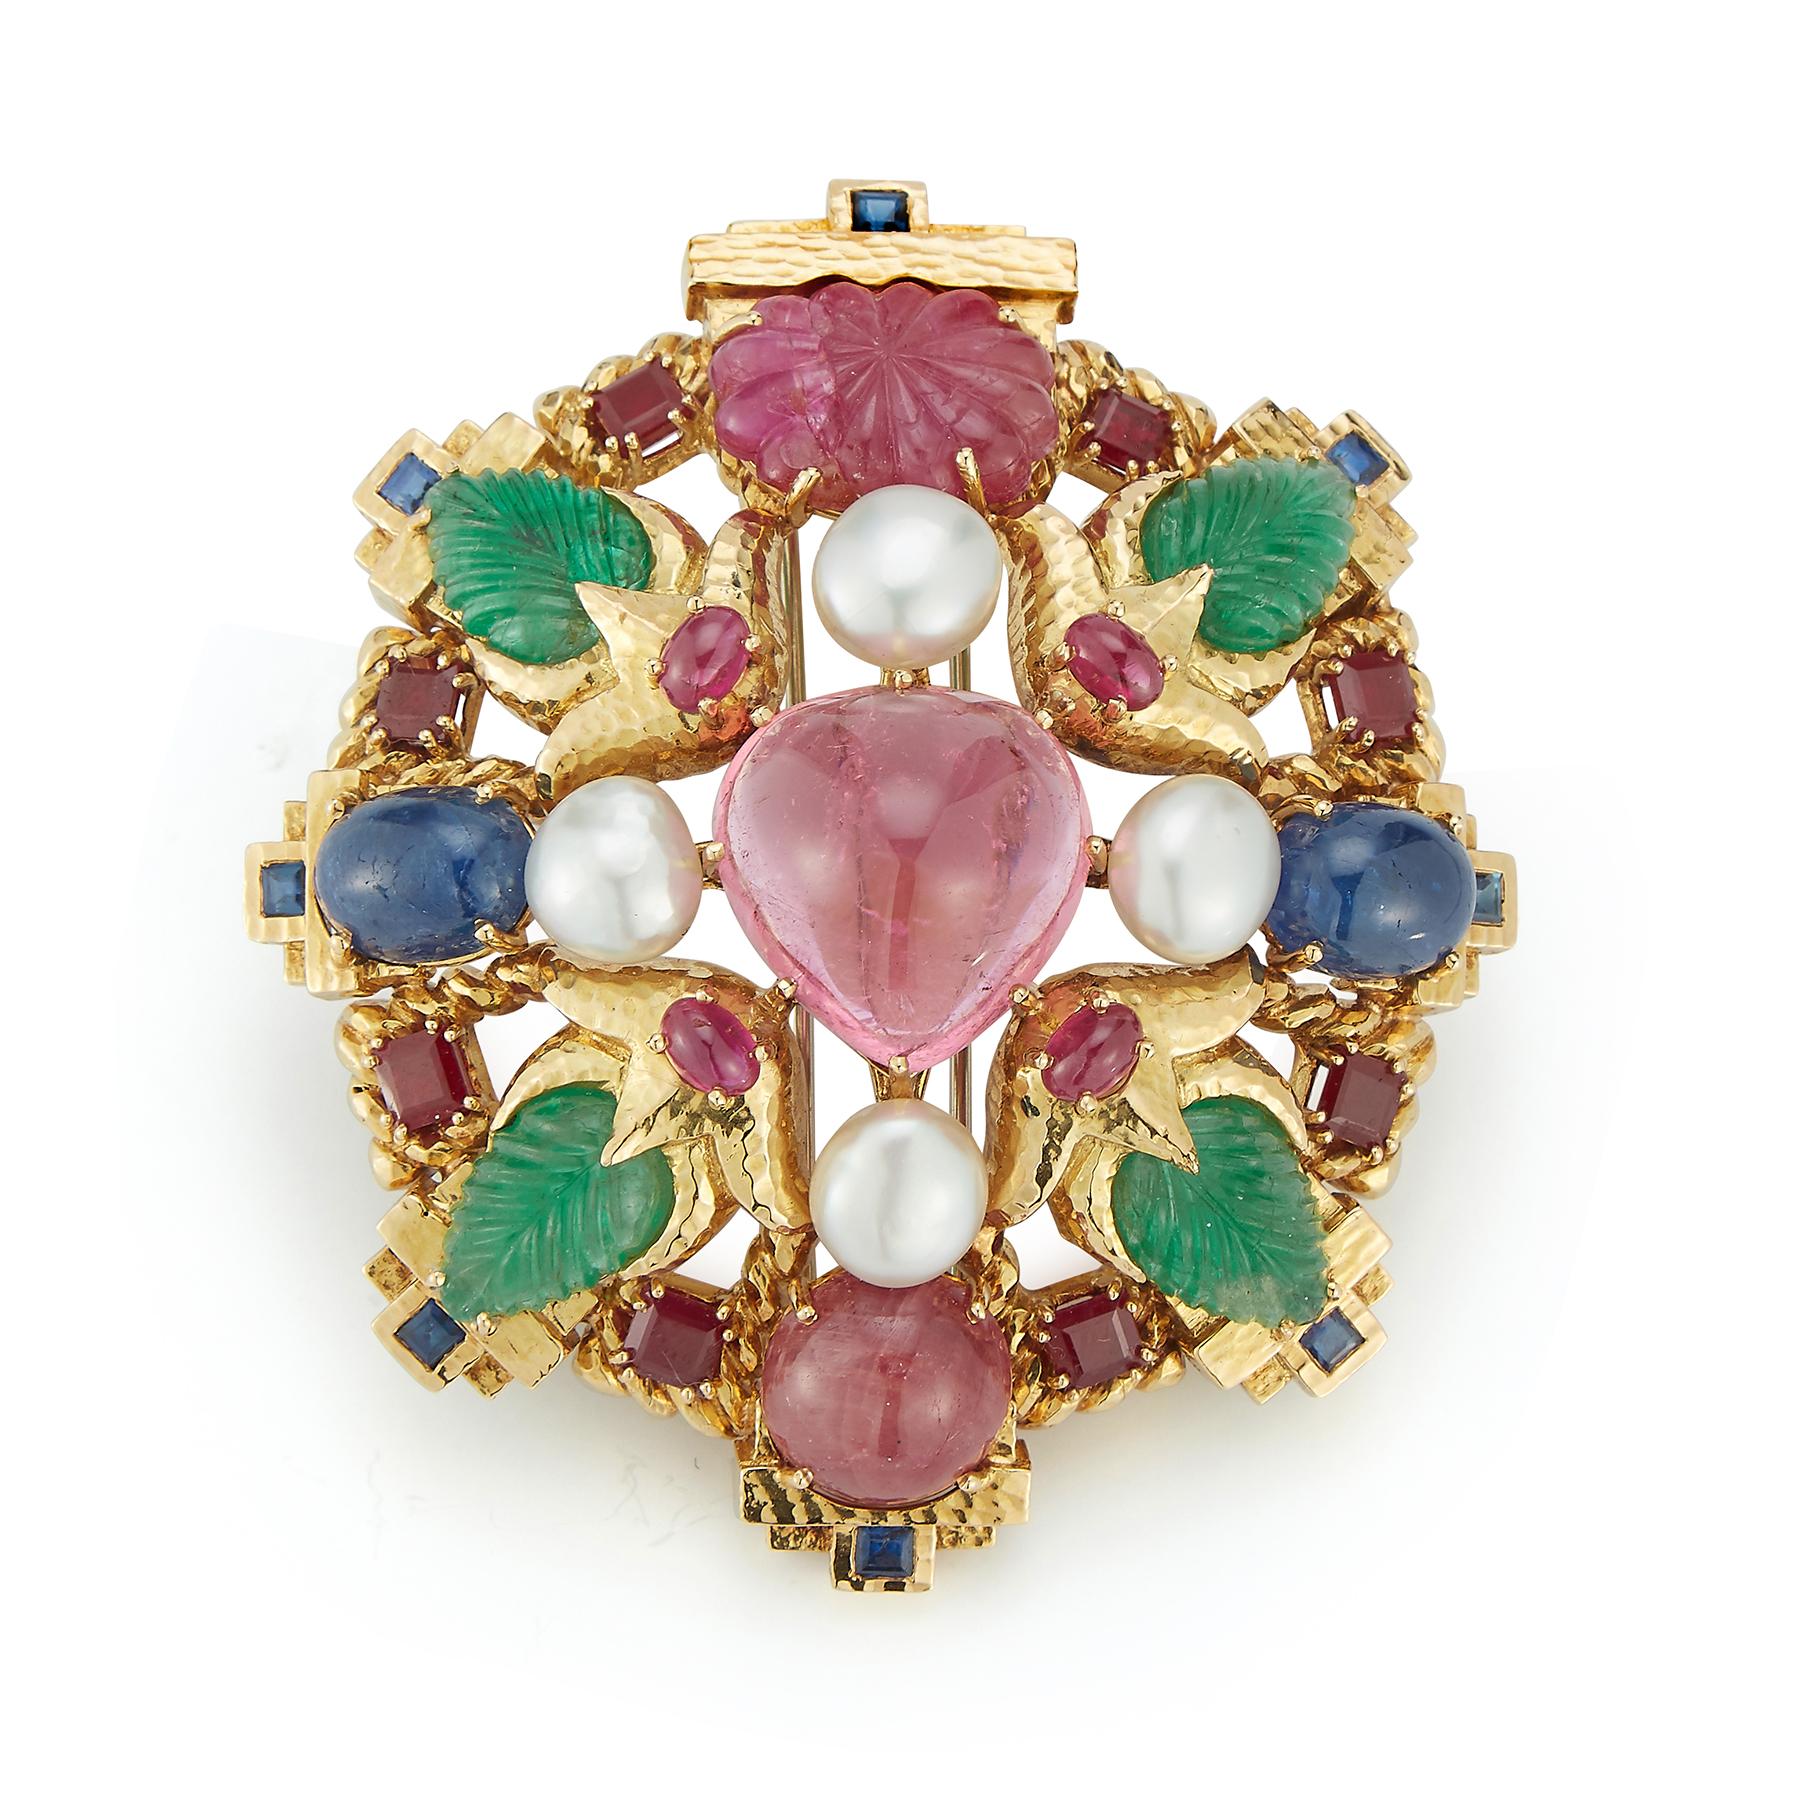 Large size David Webb Multi Gem Pendant Brooch consisting of pearls, cabochon and carved pink tourmaline, carved emeralds, & cabochon sapphires.

Measurements: 2.5